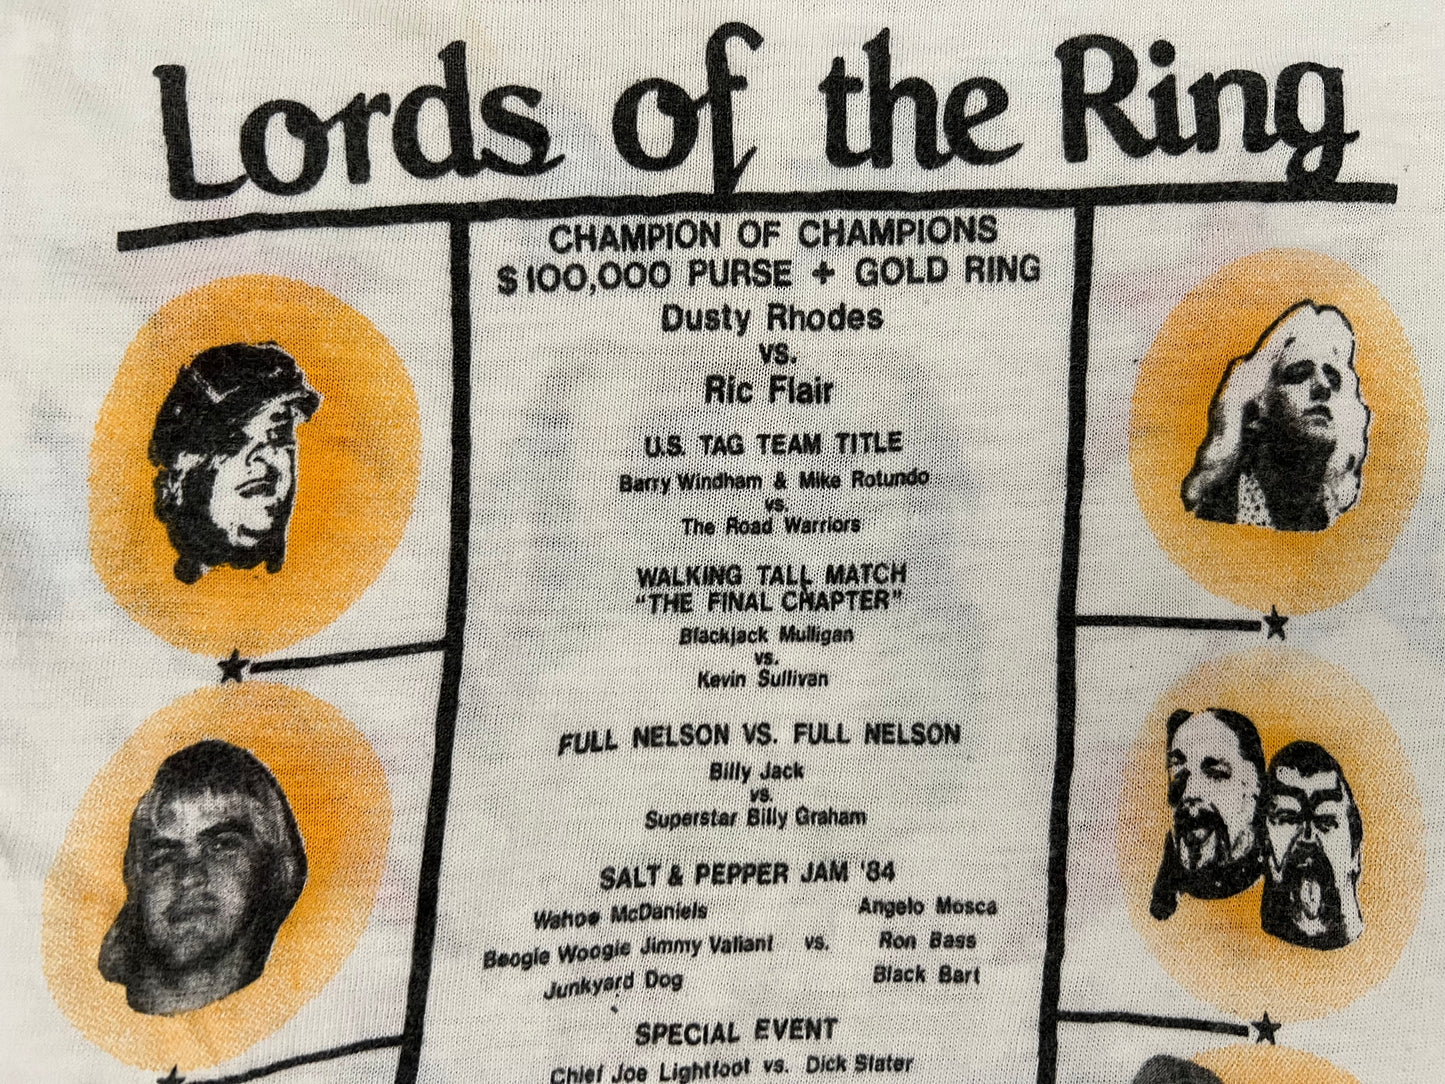 1984 NWA “Lords of the Ring” two sided event shirt